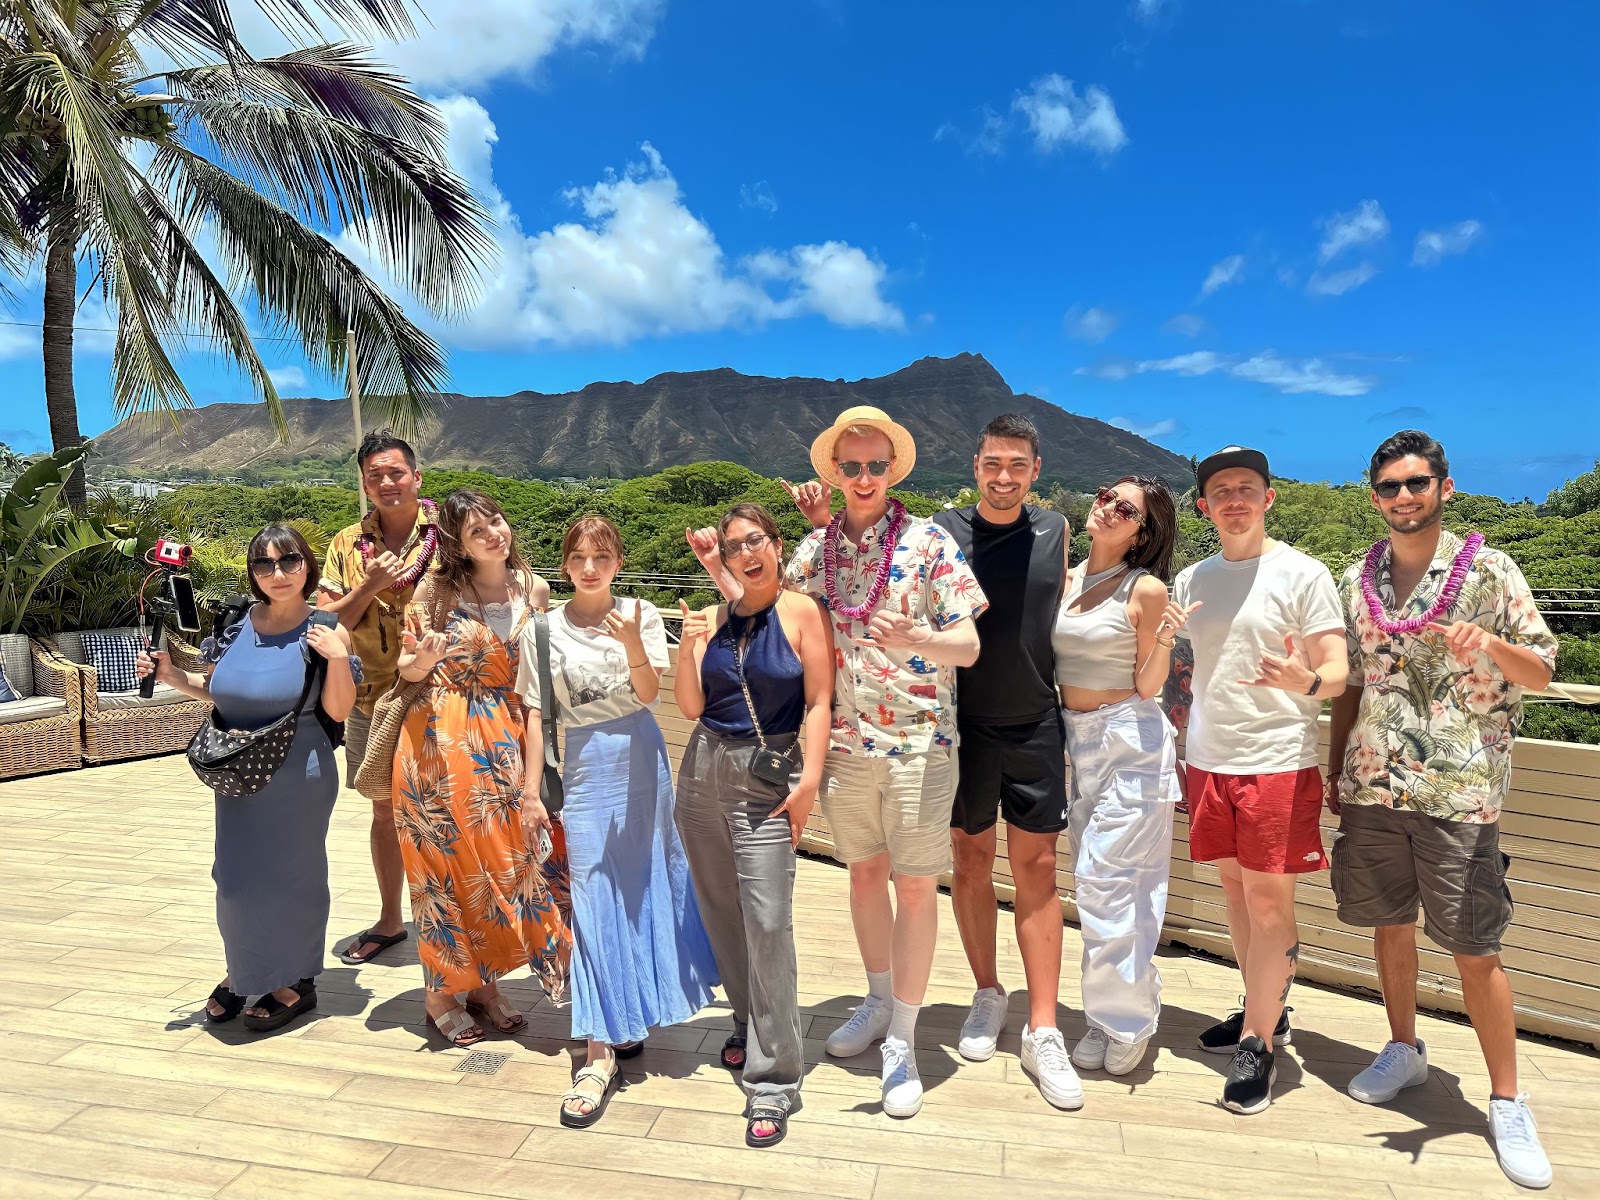 Gen Z And Millennial Brand Experts At Future Collective Launch Lōkahi Hawai‘i Influencer Marketing Campaign